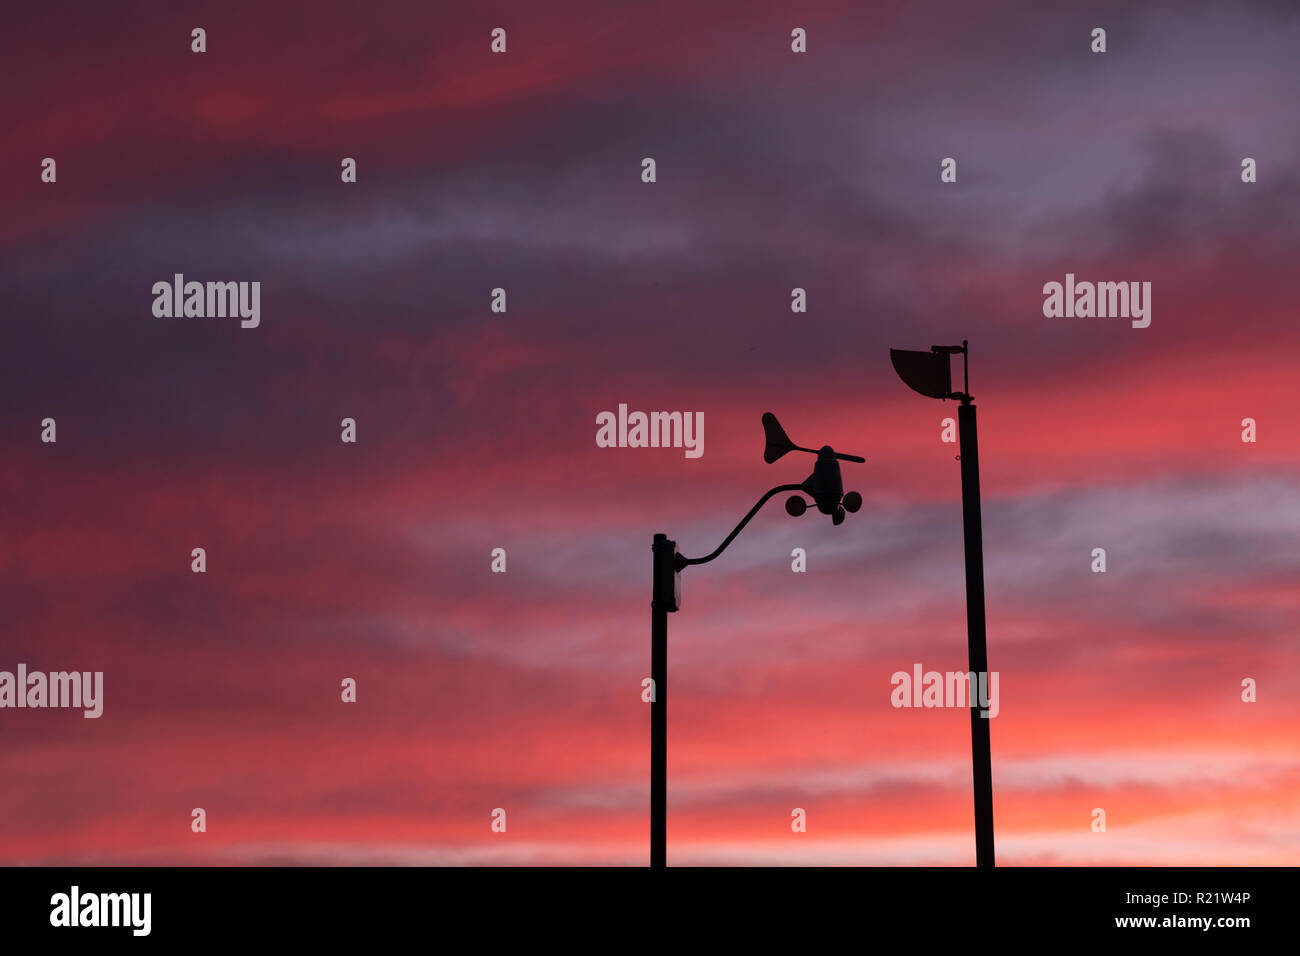 Weather Instruments Against Evening Sky Stock Photo